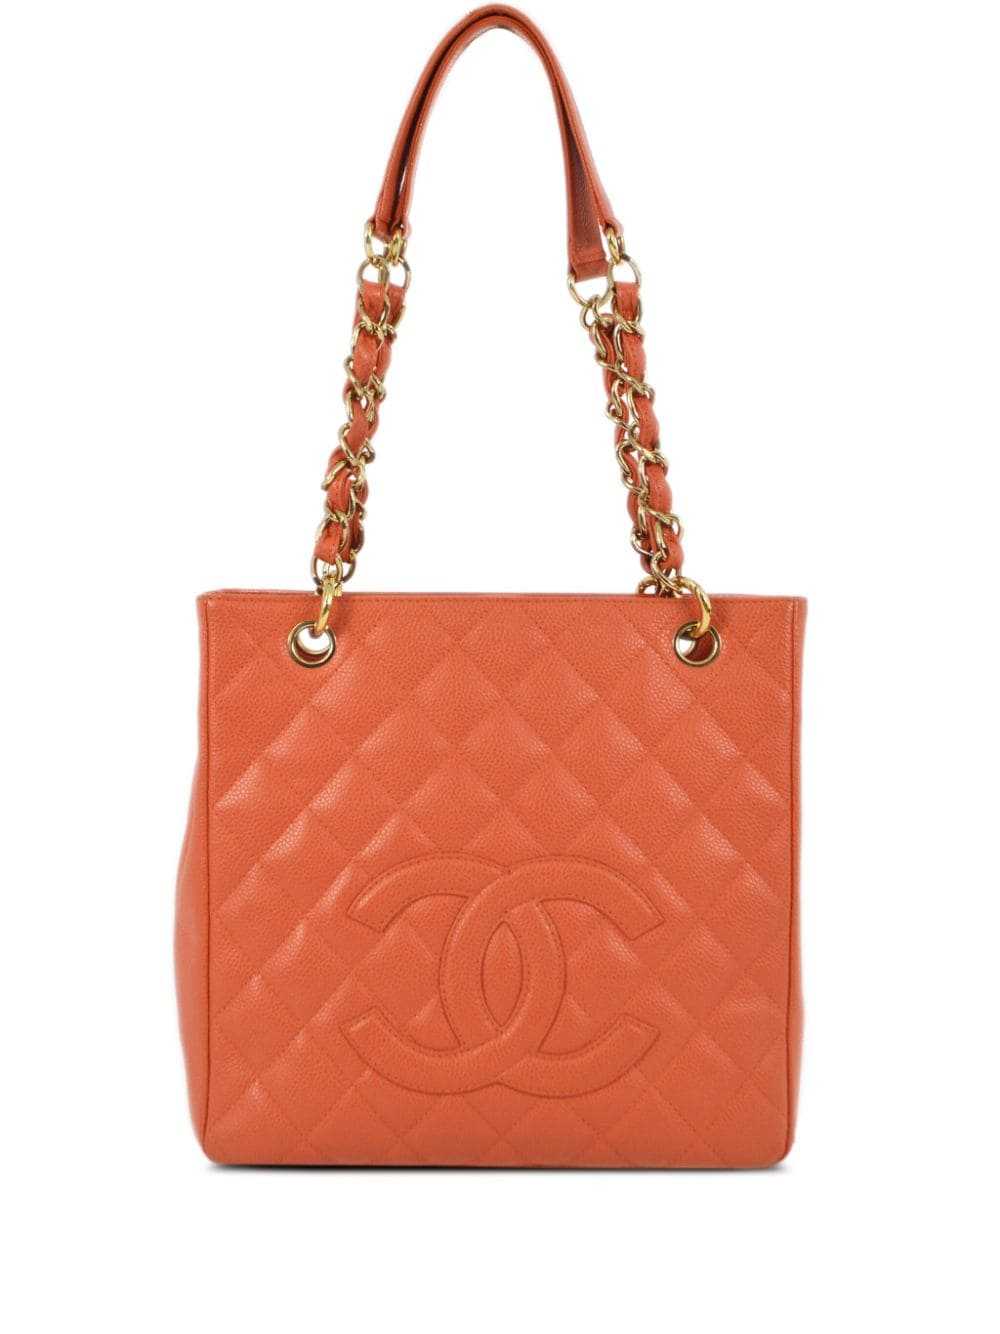 CHANEL Pre-Owned 2003 Petite Shopping tote bag - … - image 1